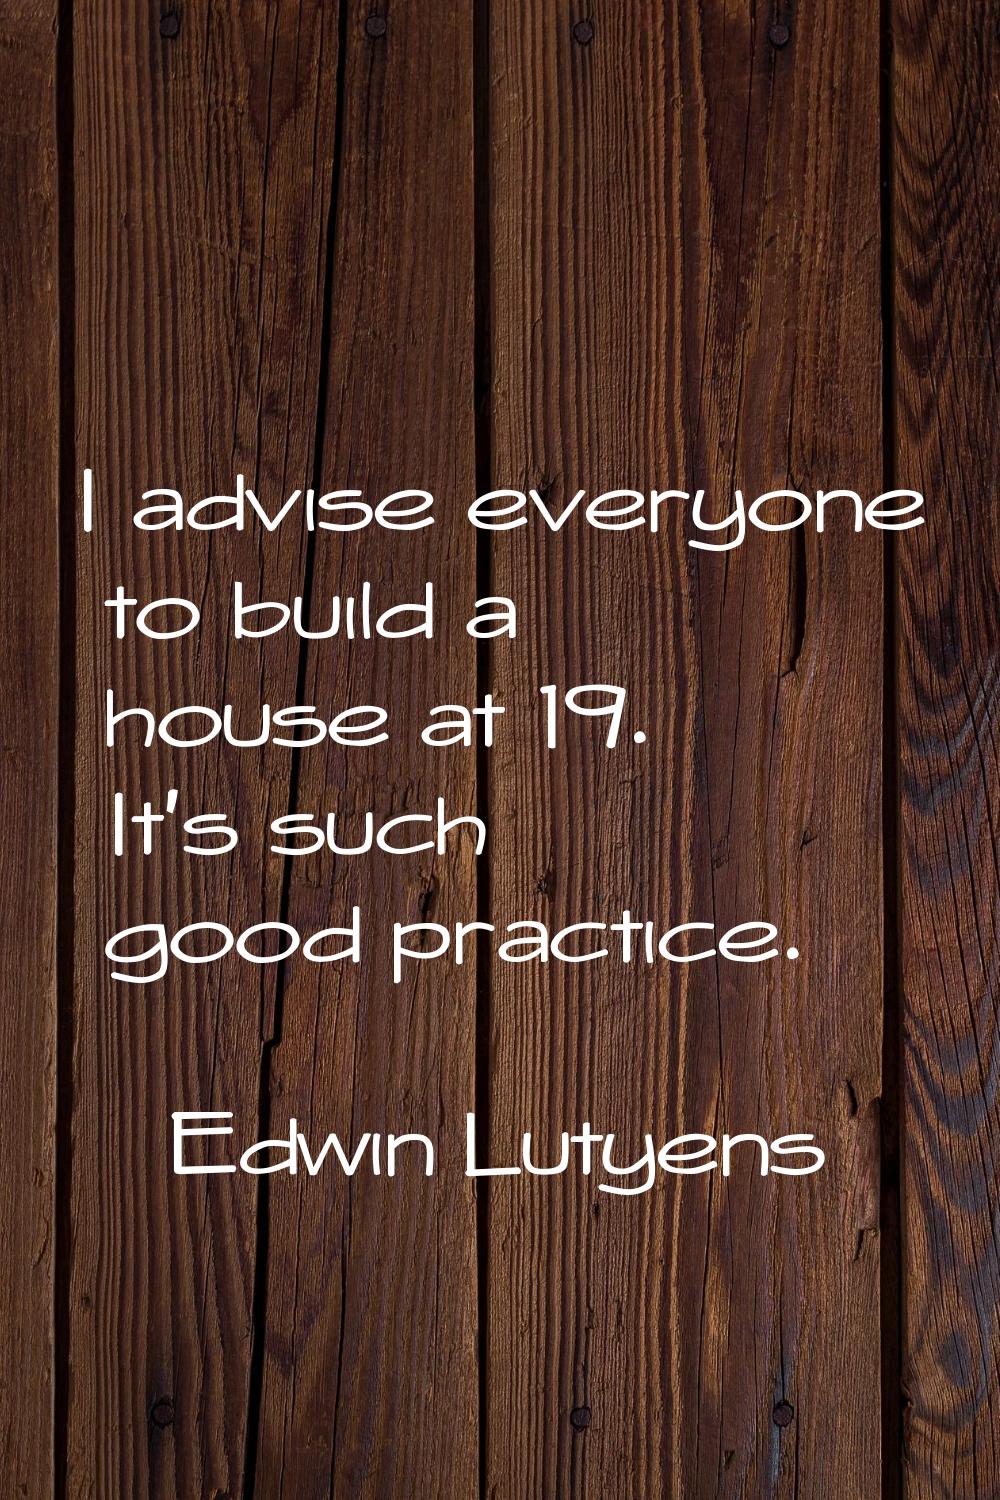 I advise everyone to build a house at 19. It's such good practice.